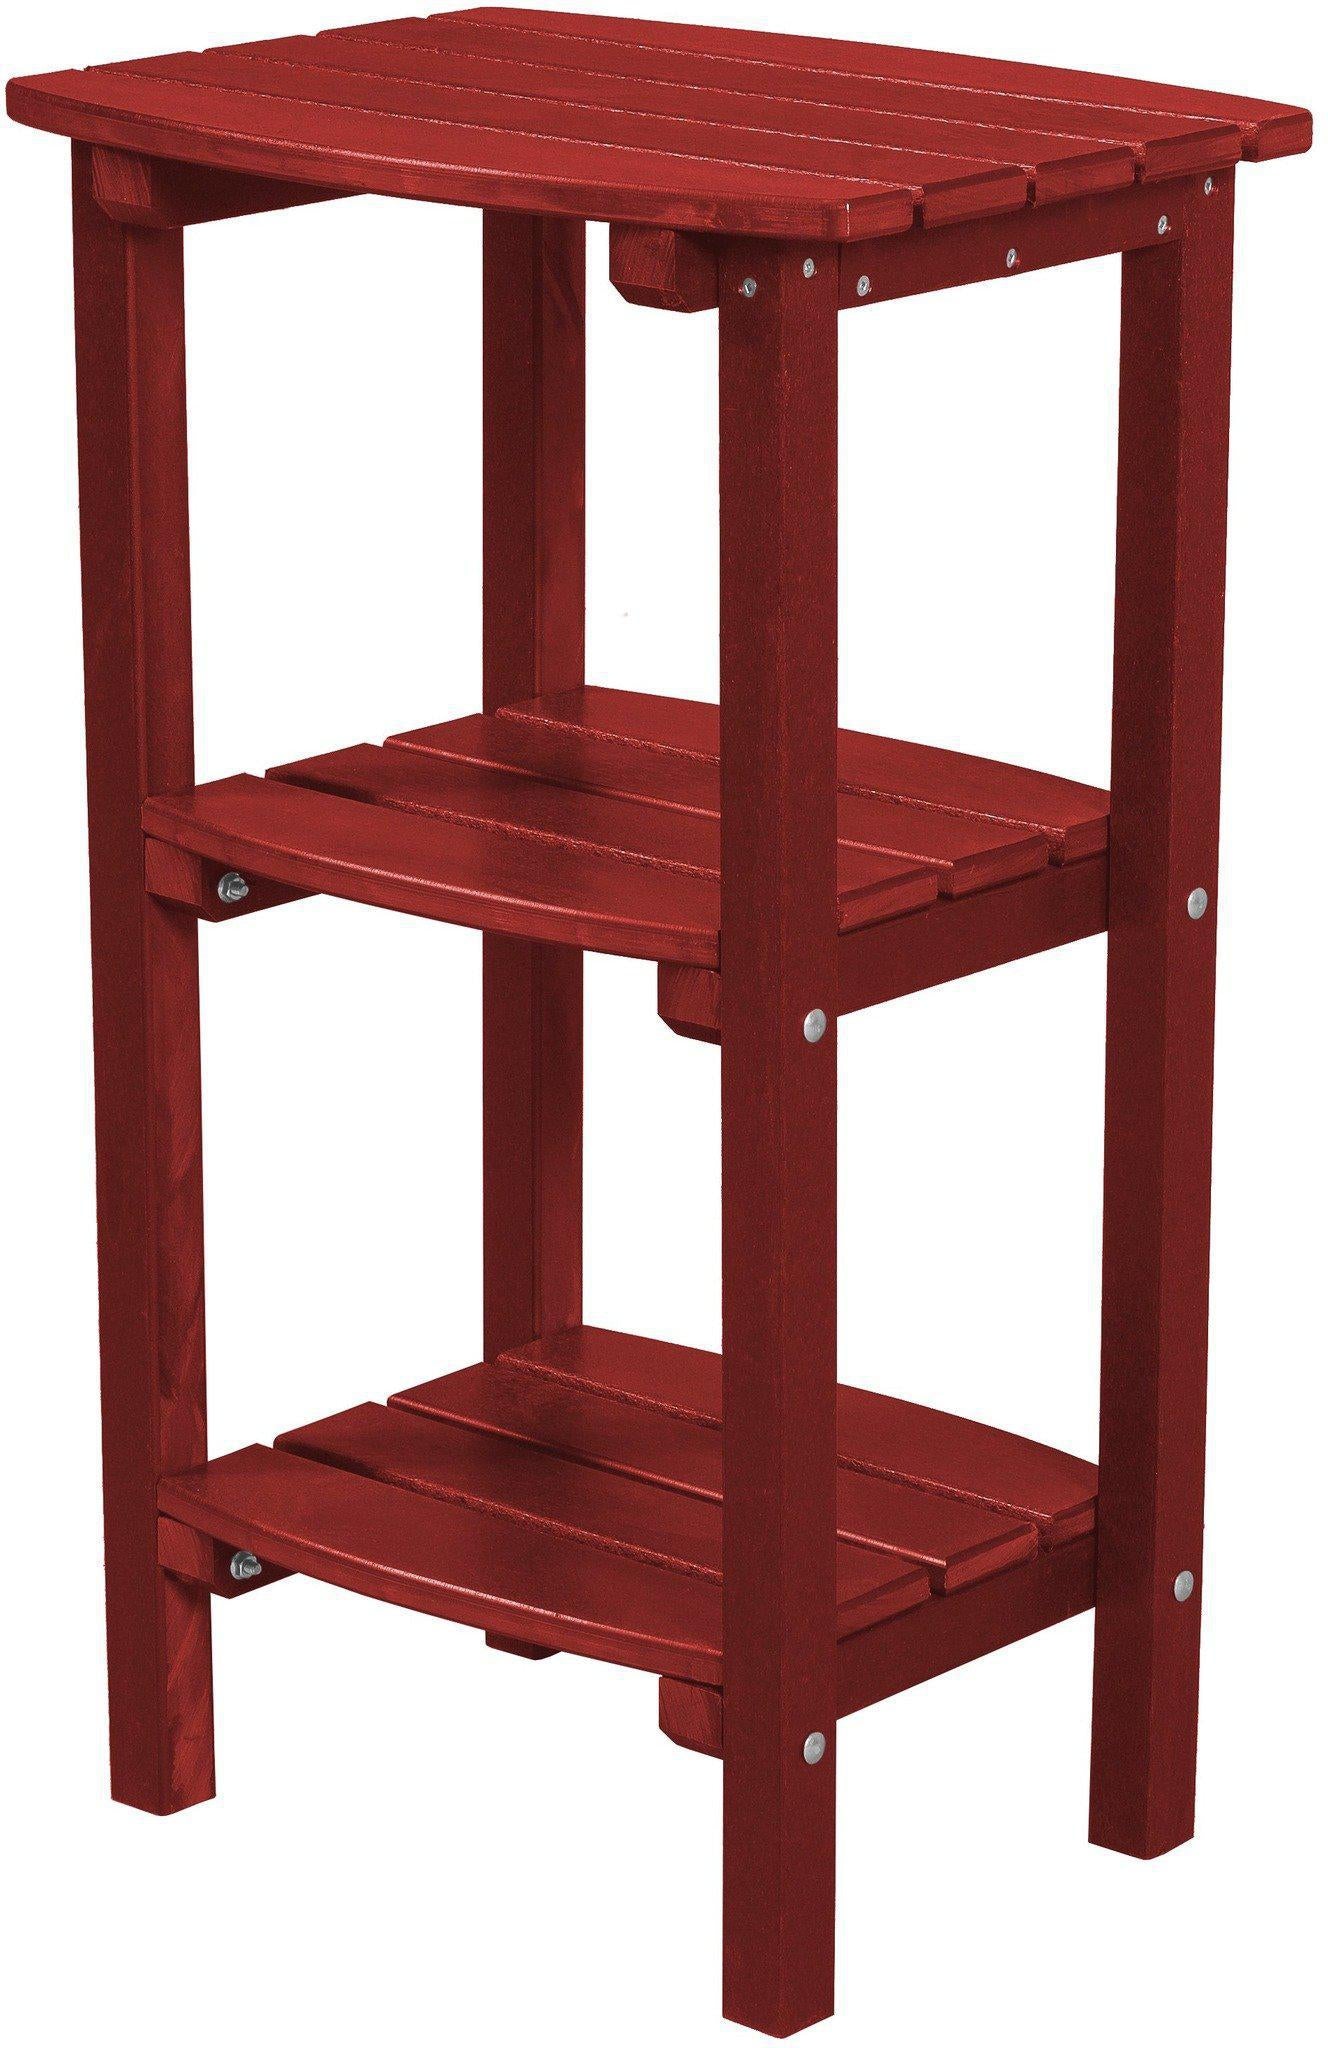 Wildridge Recycled Plastic LCC-221 Classic 3 Shelf Side Table (COUNTER HEIGHT) - LEAD TIME TO SHIP 3 WEEKS